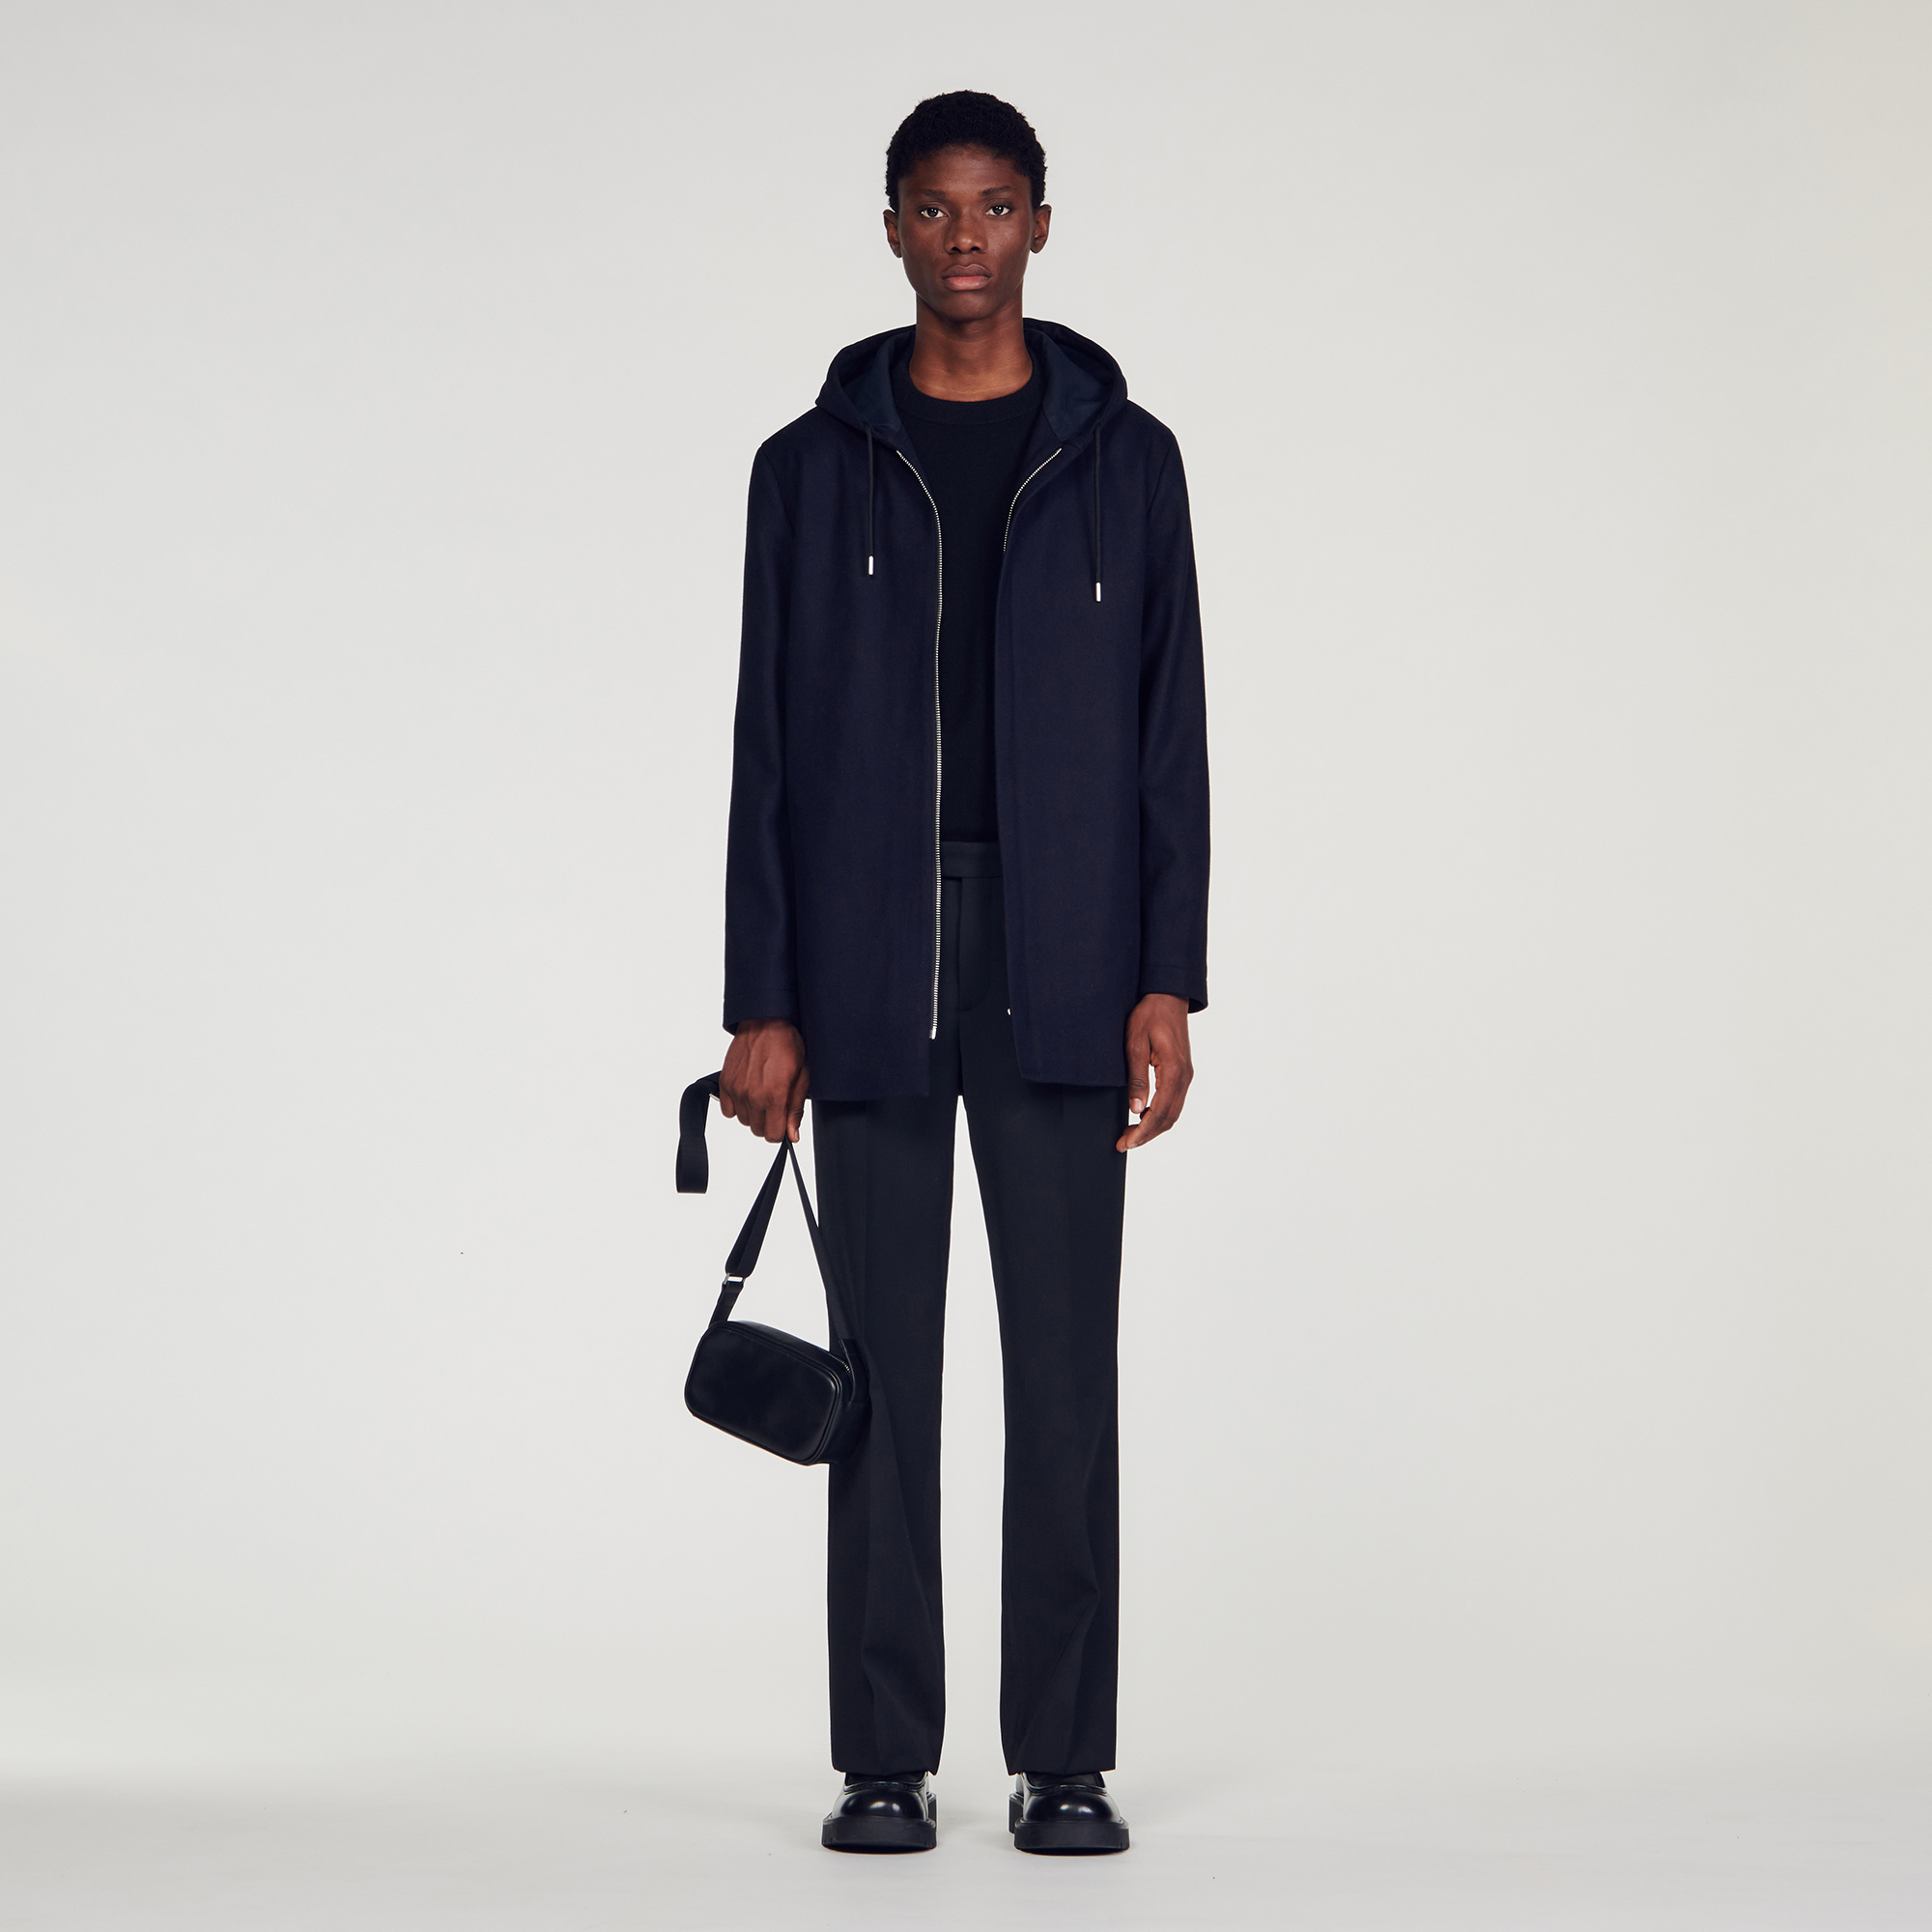 Sandro wool Mid-length coat with zip opening, drawstring hood and long sleeves